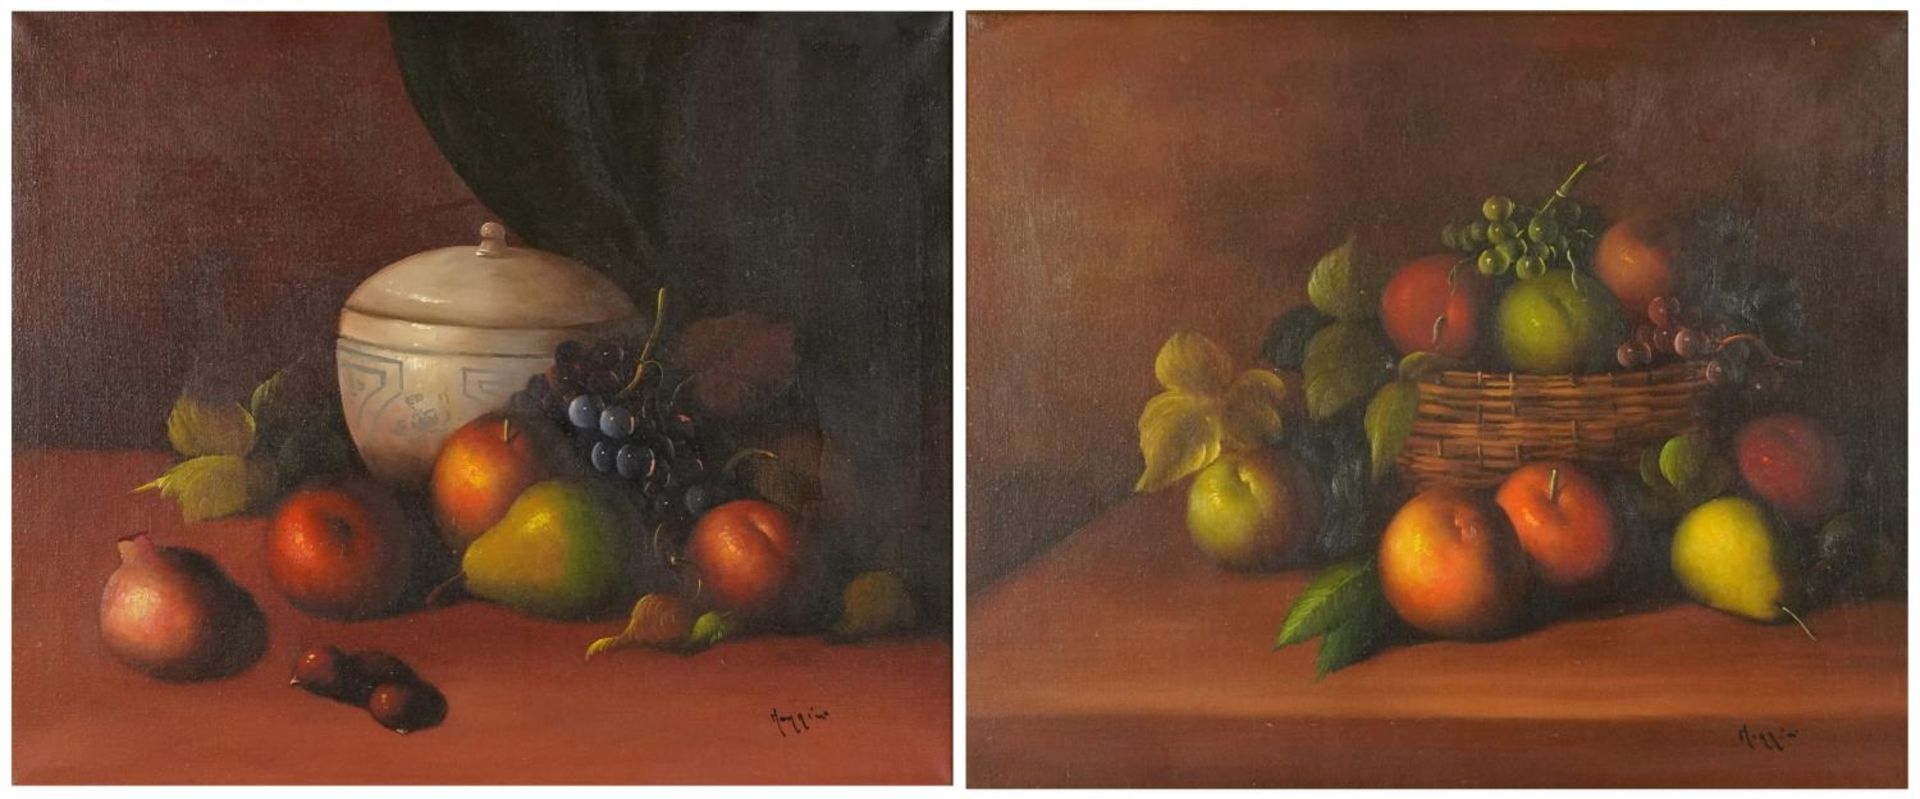 Morrini - Still life fruit and vessels, pair of Italian school oil on canvases, mounted and